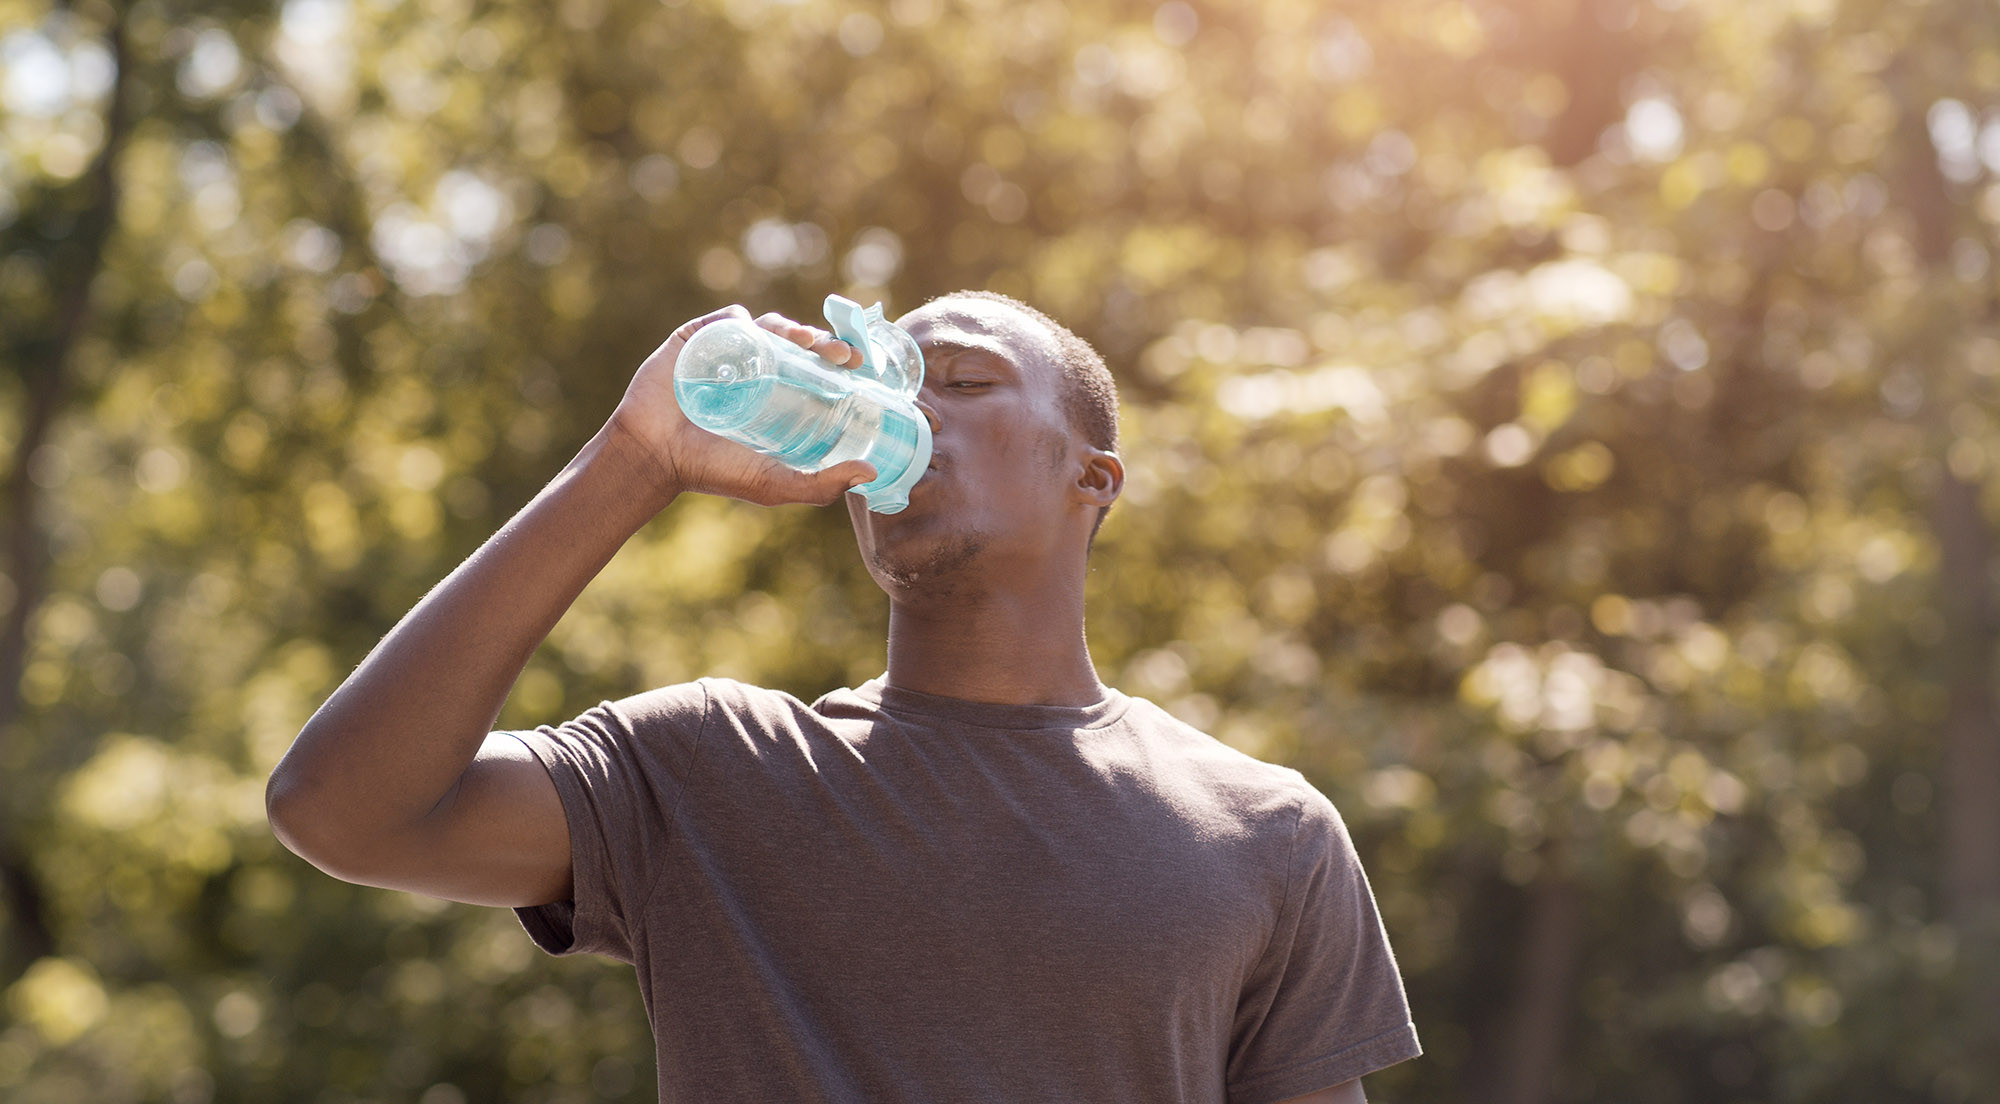 Man drinking water in hot weather